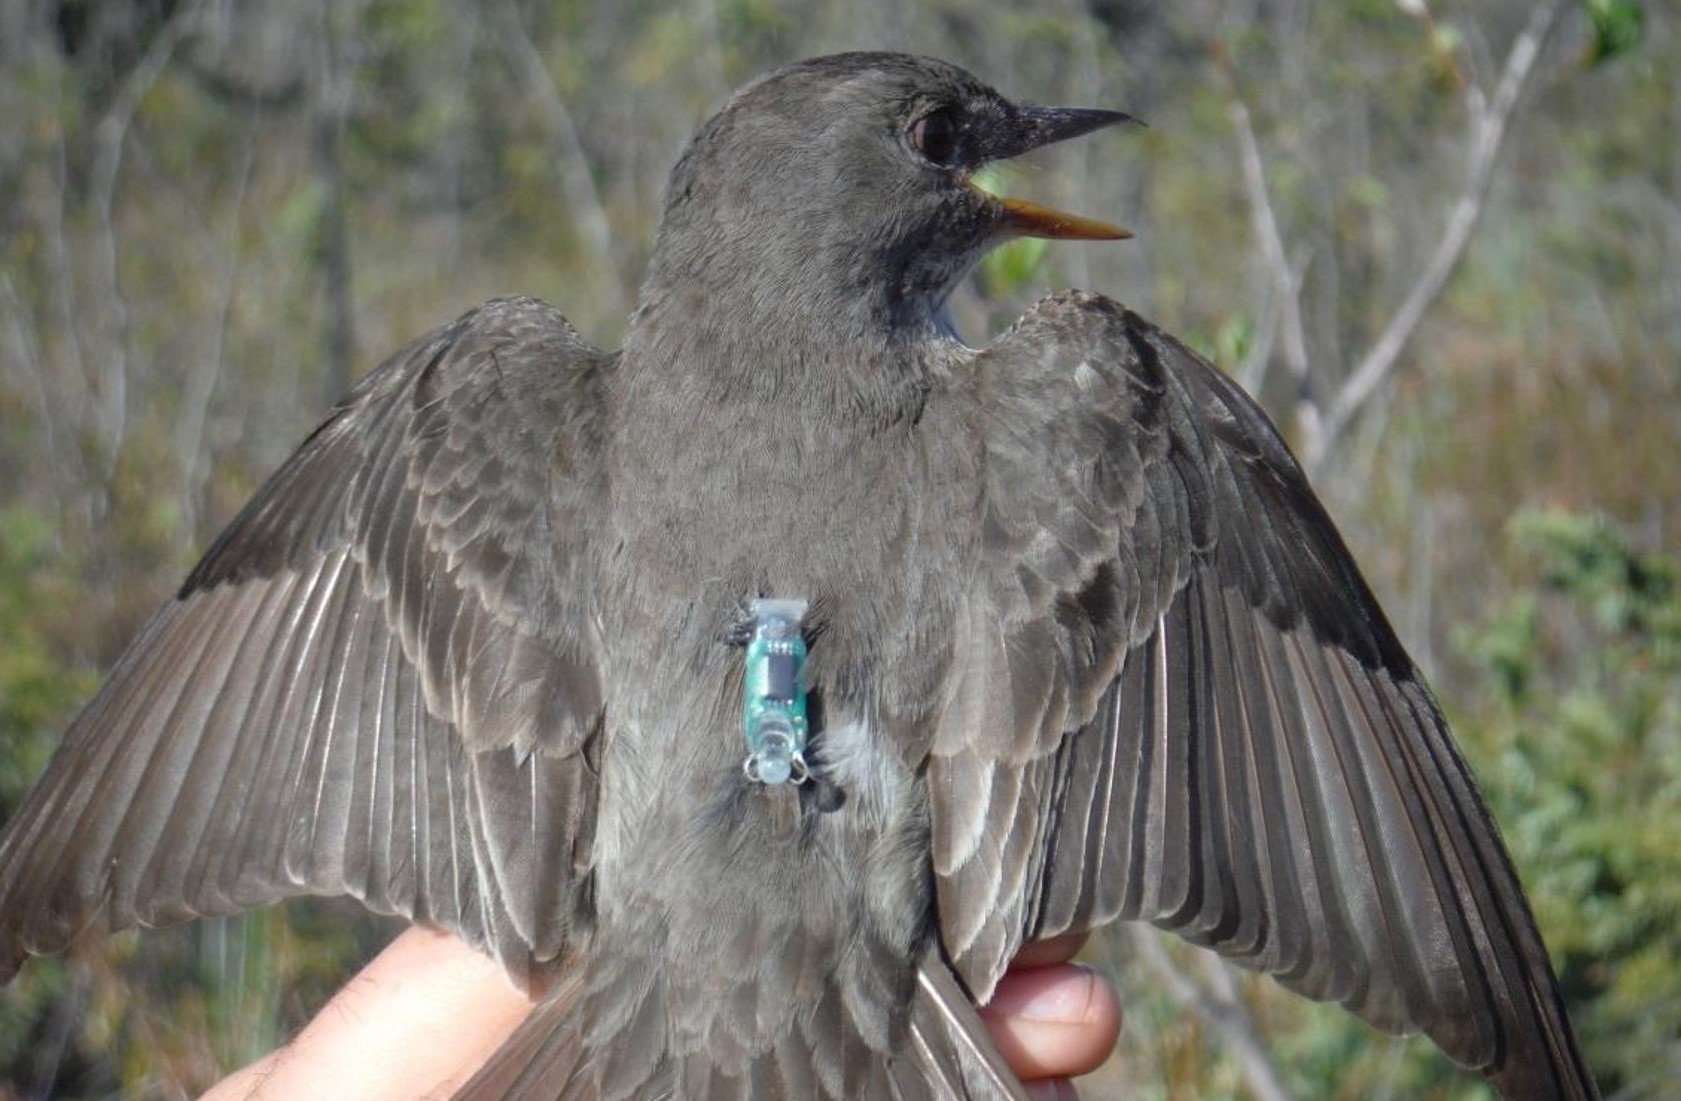 Olive-sided Flycatcher with light-level geolocator on its back. Photo: J. Hagelin, ADFG - Alaska Department of Fish and Game (ADFG)